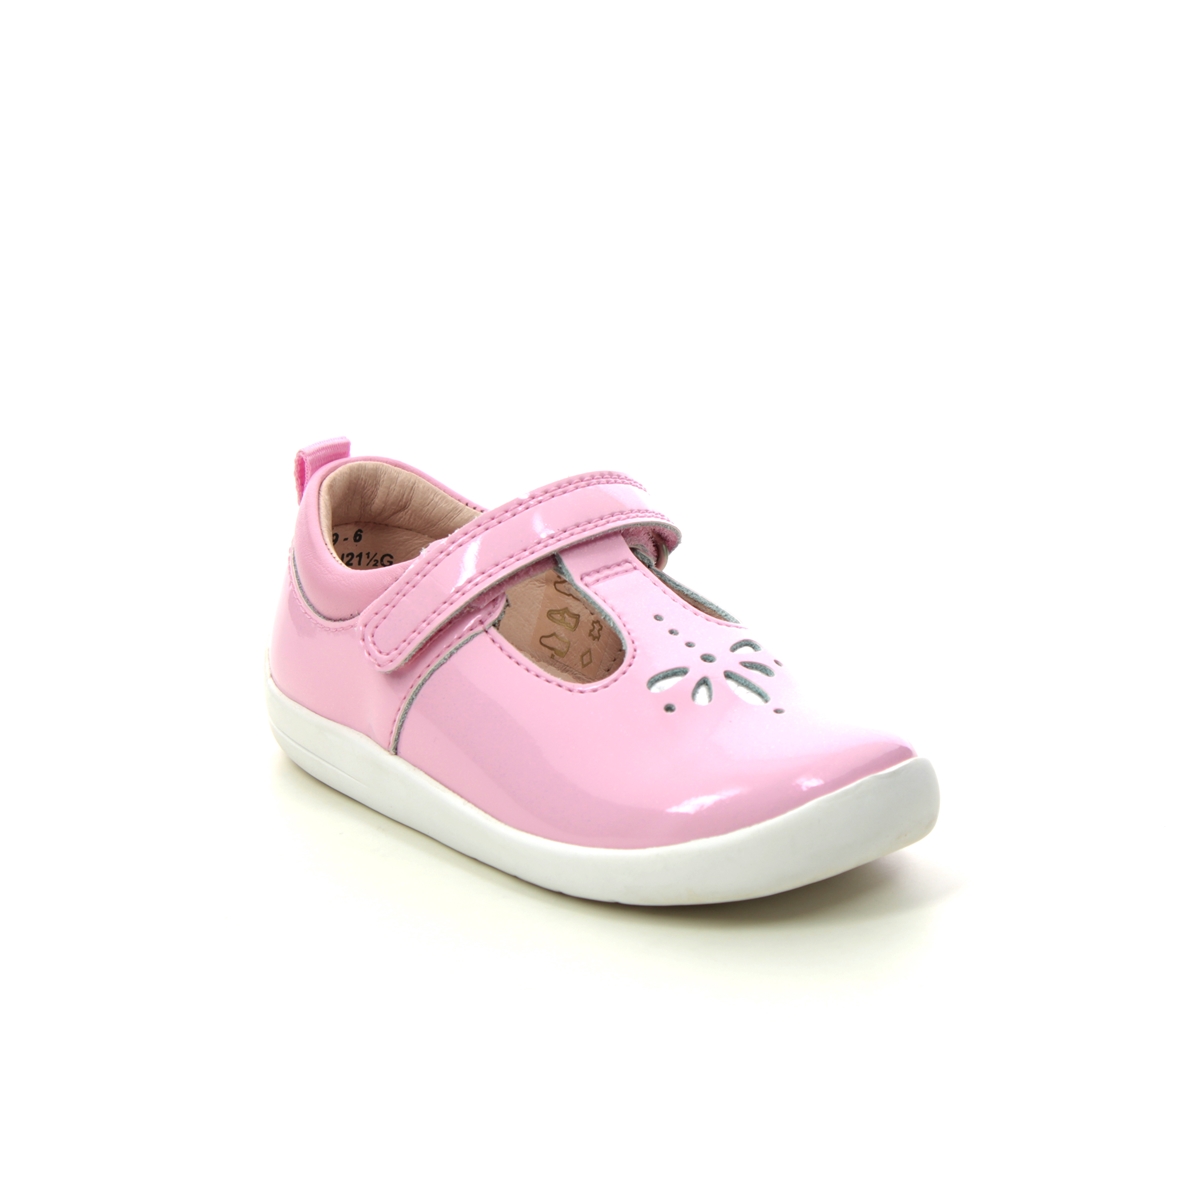 Start Rite - Puzzle In Pink 0779-67G In Size 7 In Plain Pink 1St Shoes & Prewalkers  In Pink For kids